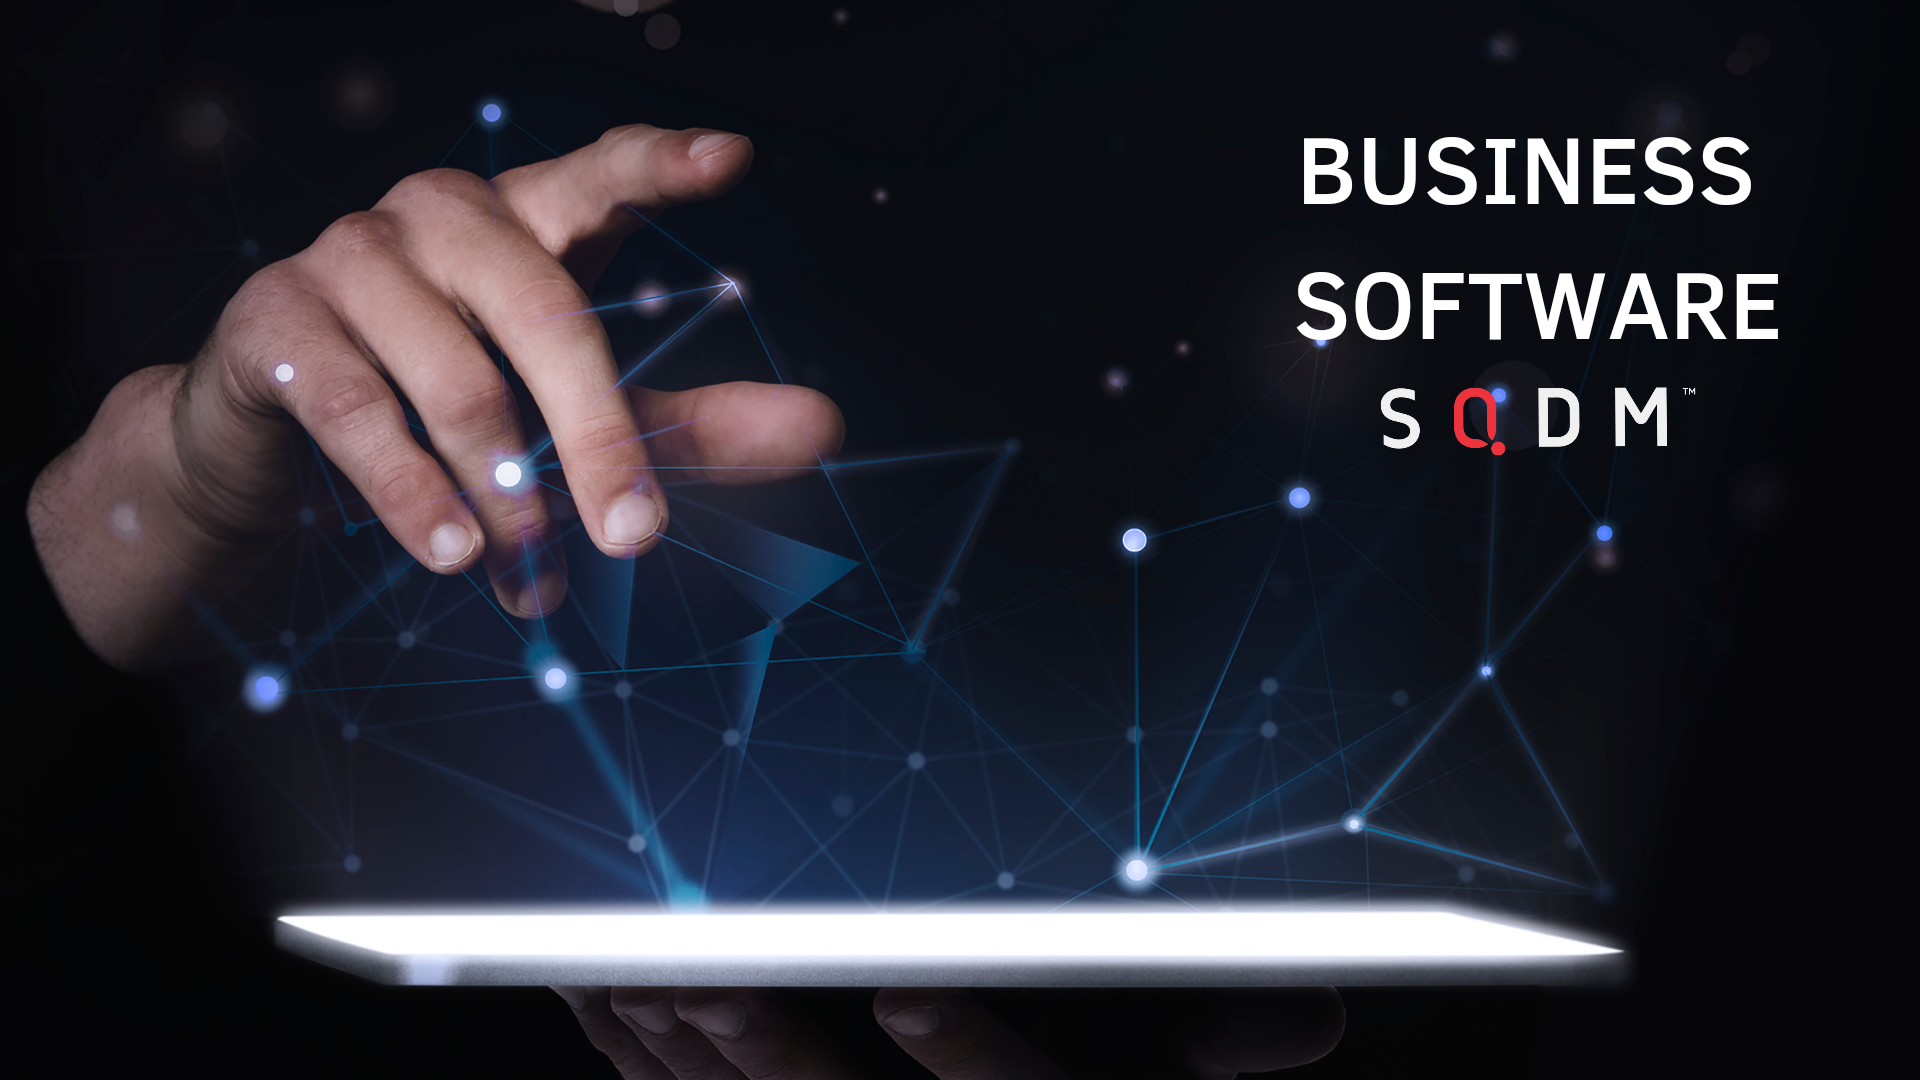 Software for business